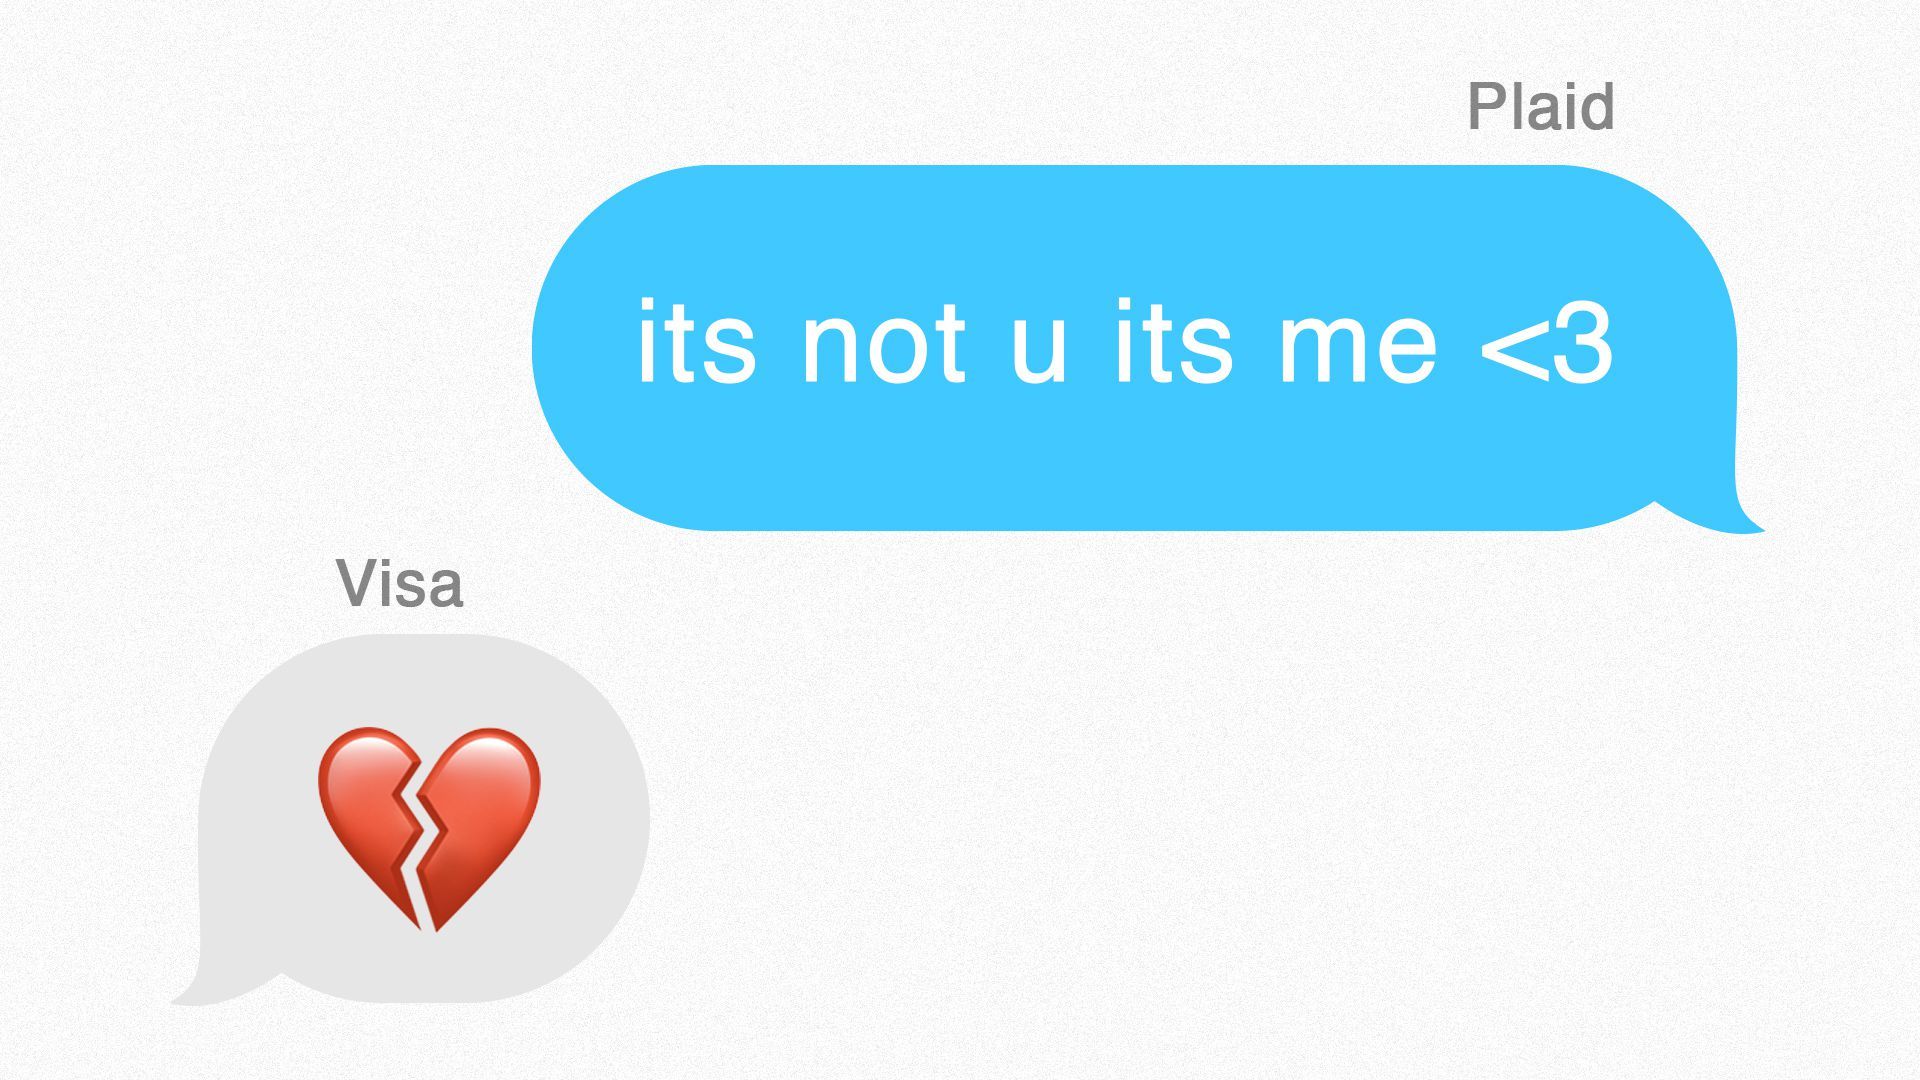 Illustration of a chat conversation between Plaid and Visa, Plaid is saying "its not me its u <3" and Visa responds with a broken heart emoji.